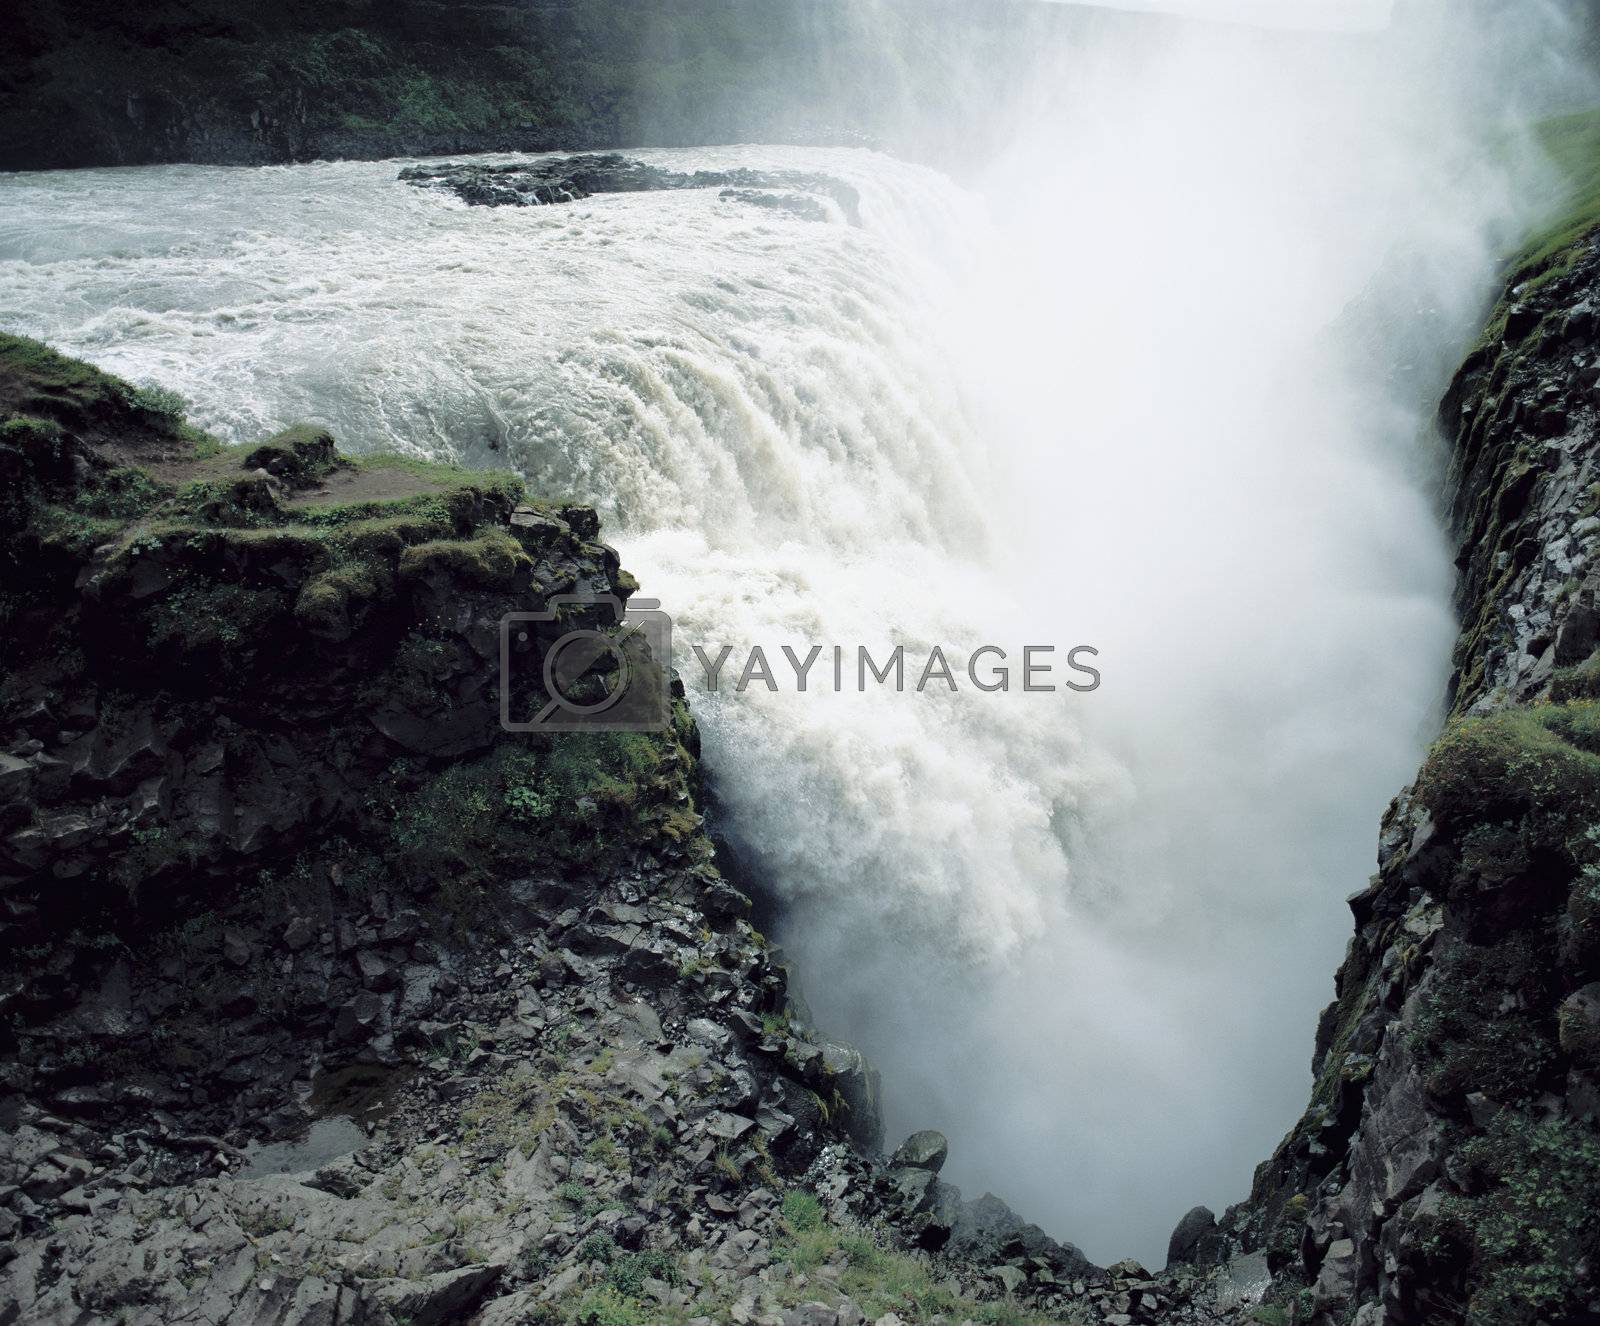 Royalty free image of Waterfall by moodboard